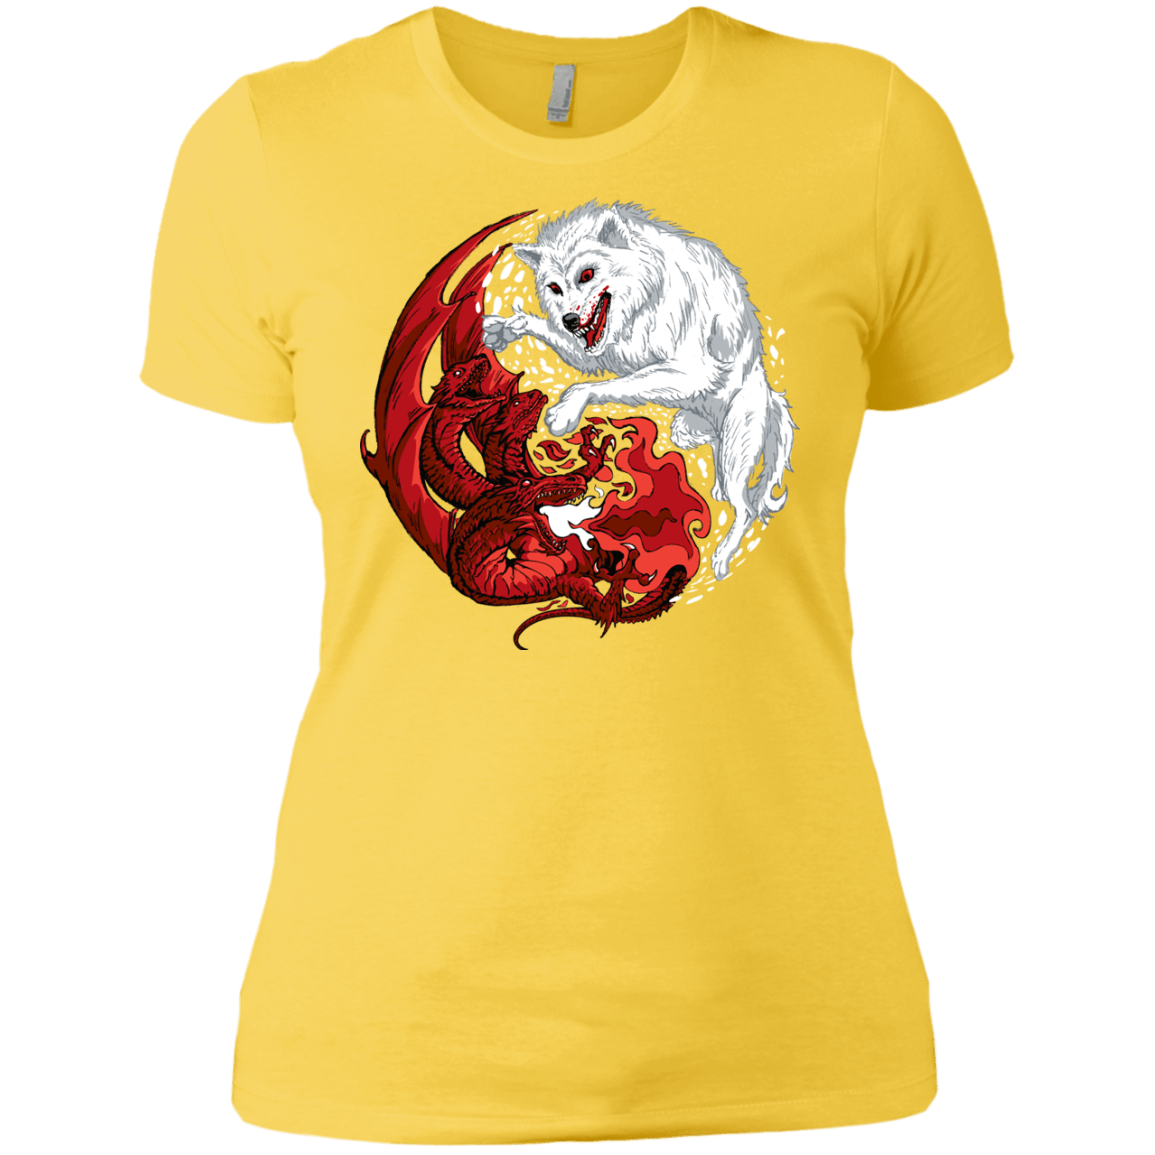 T-Shirts Vibrant Yellow / X-Small Ice and Fire Women's Premium T-Shirt